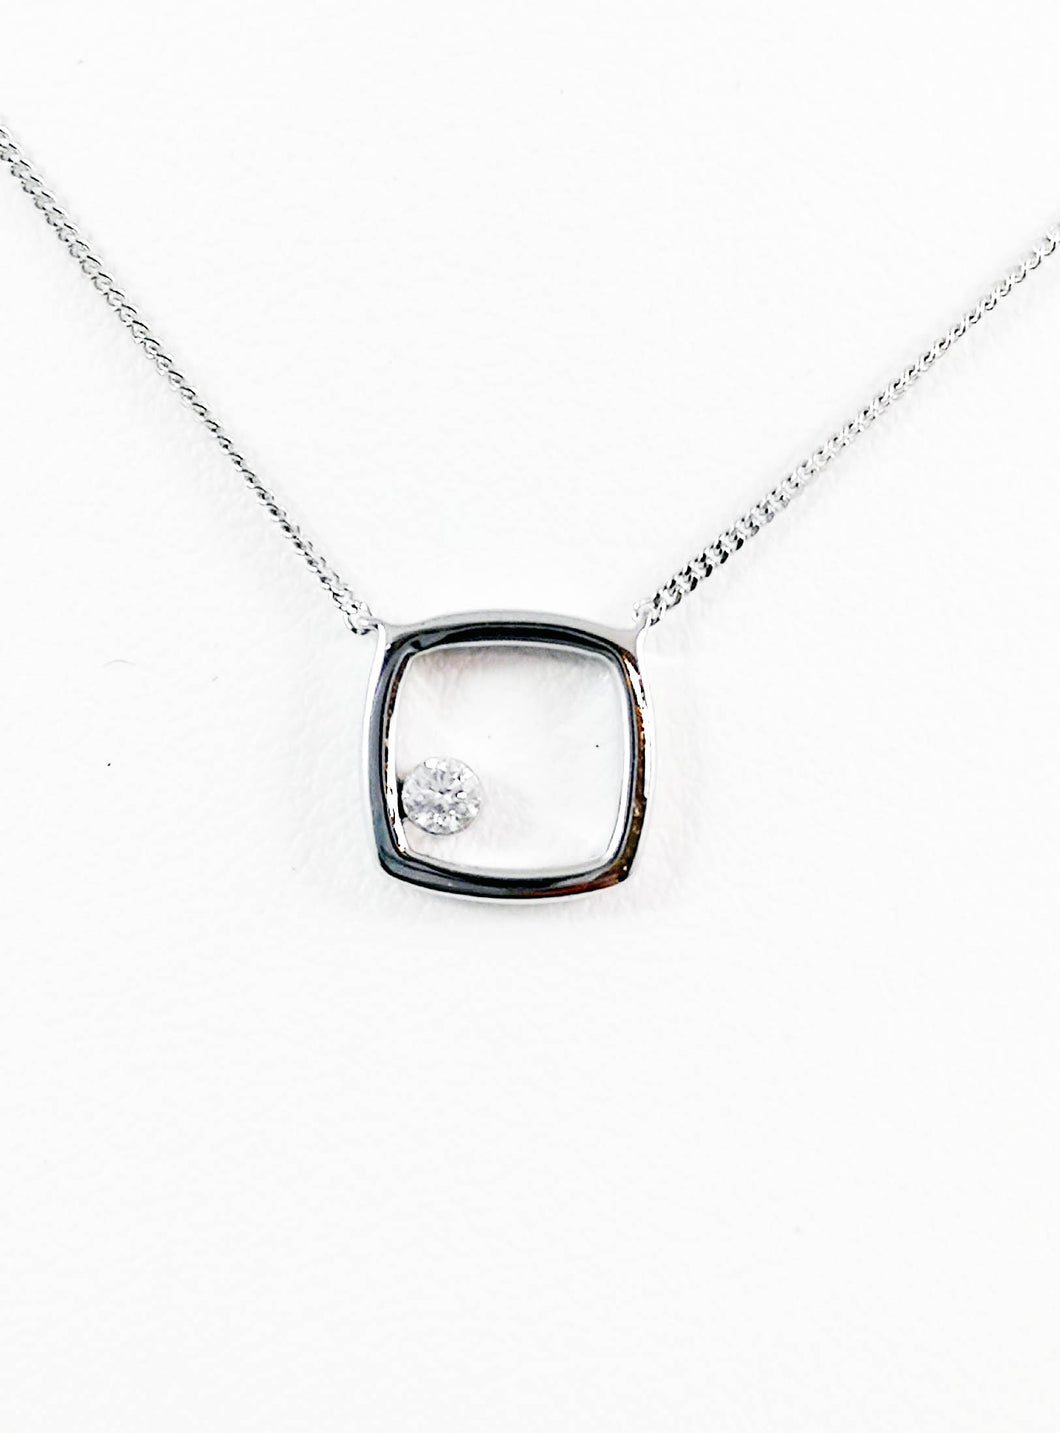 14kt White Gold and Diamond Modern Open Square Necklace